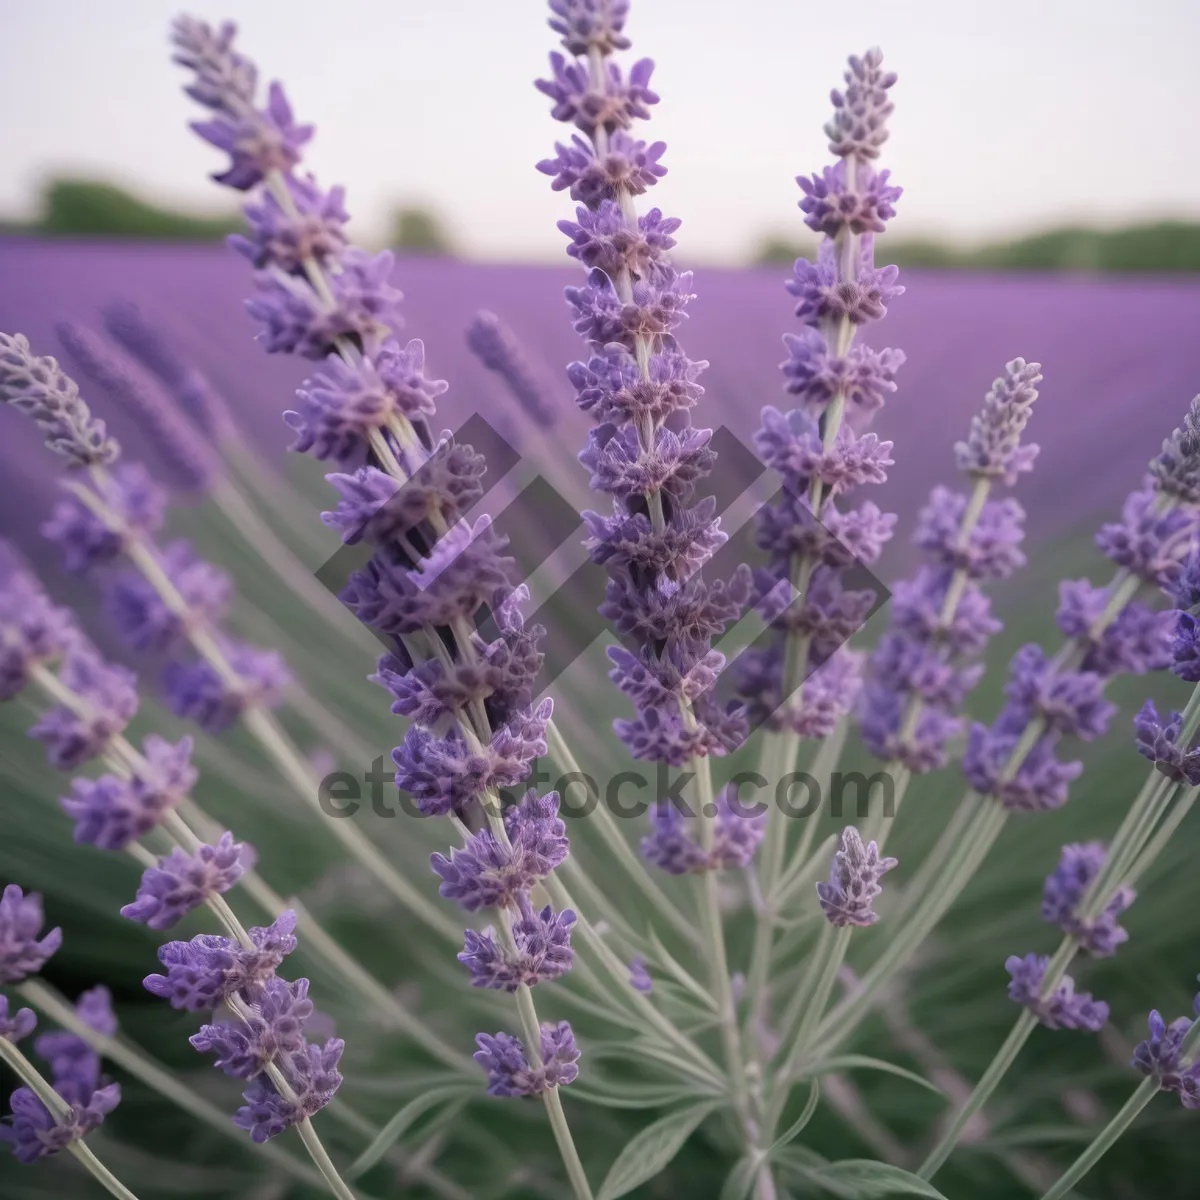 Picture of Lavender Blooms in Rural Garden"
or
"Purple Herbal Shrub Fragrance